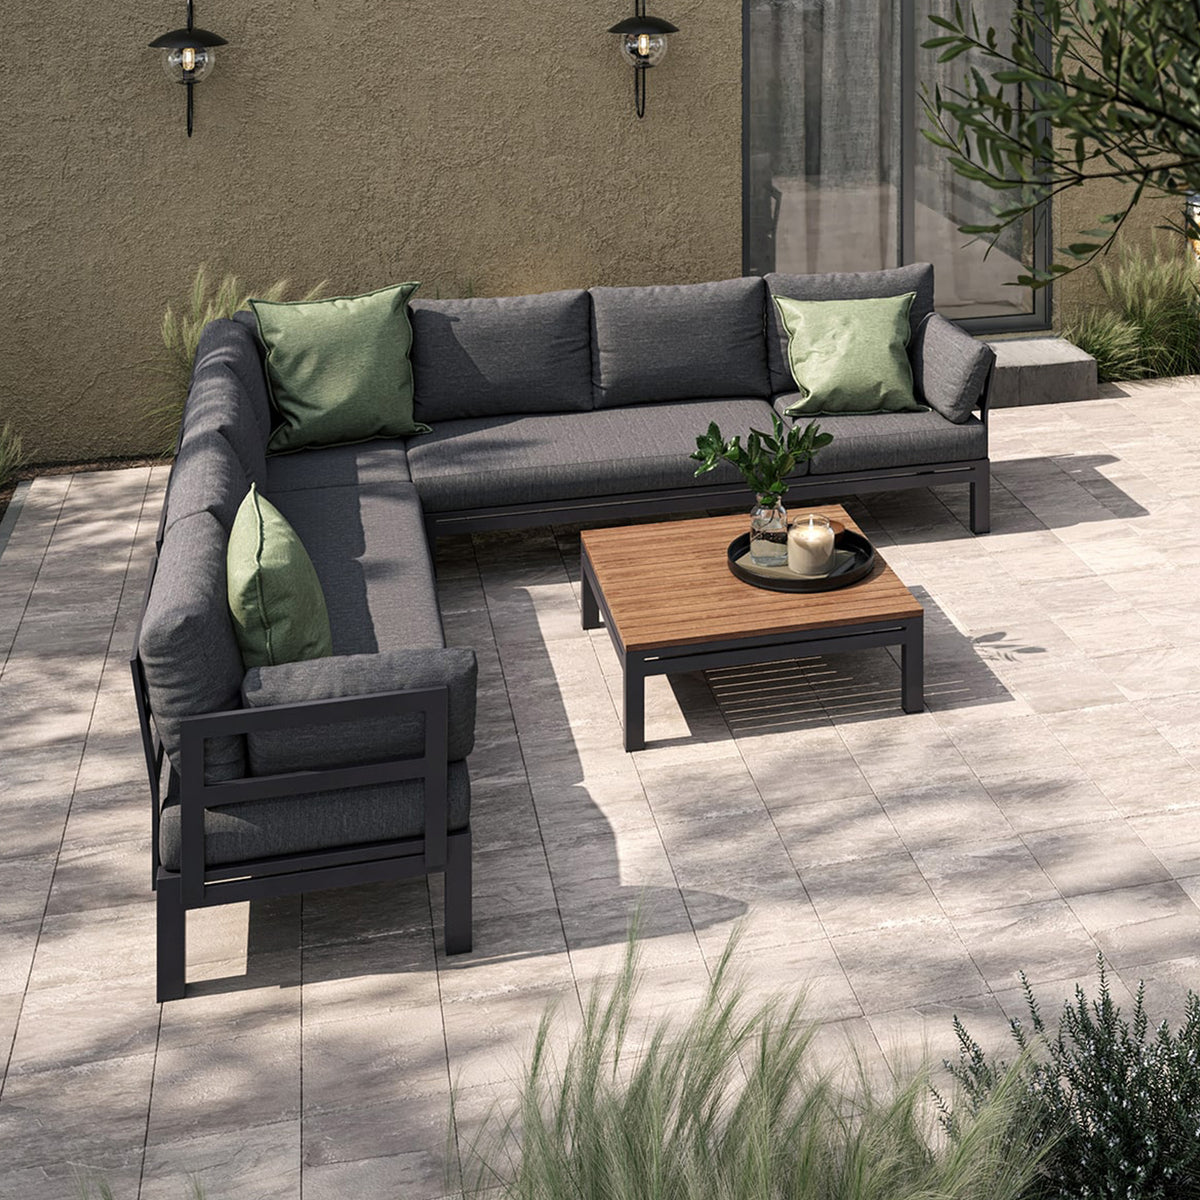 Maze Oslo Large Outdoor Corner Sofa Group from Roseland Furniture